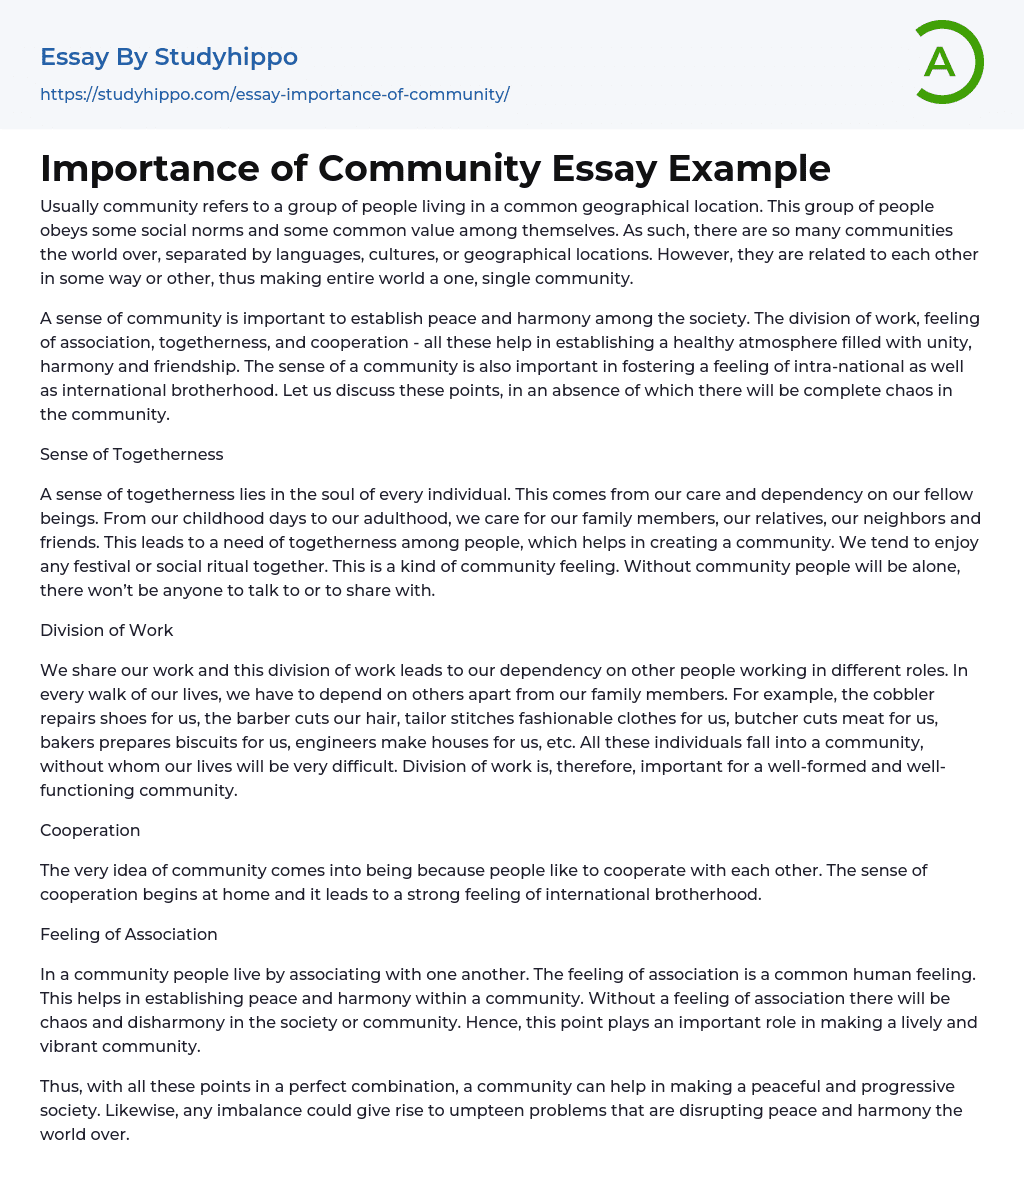 Importance of Community Essay Example